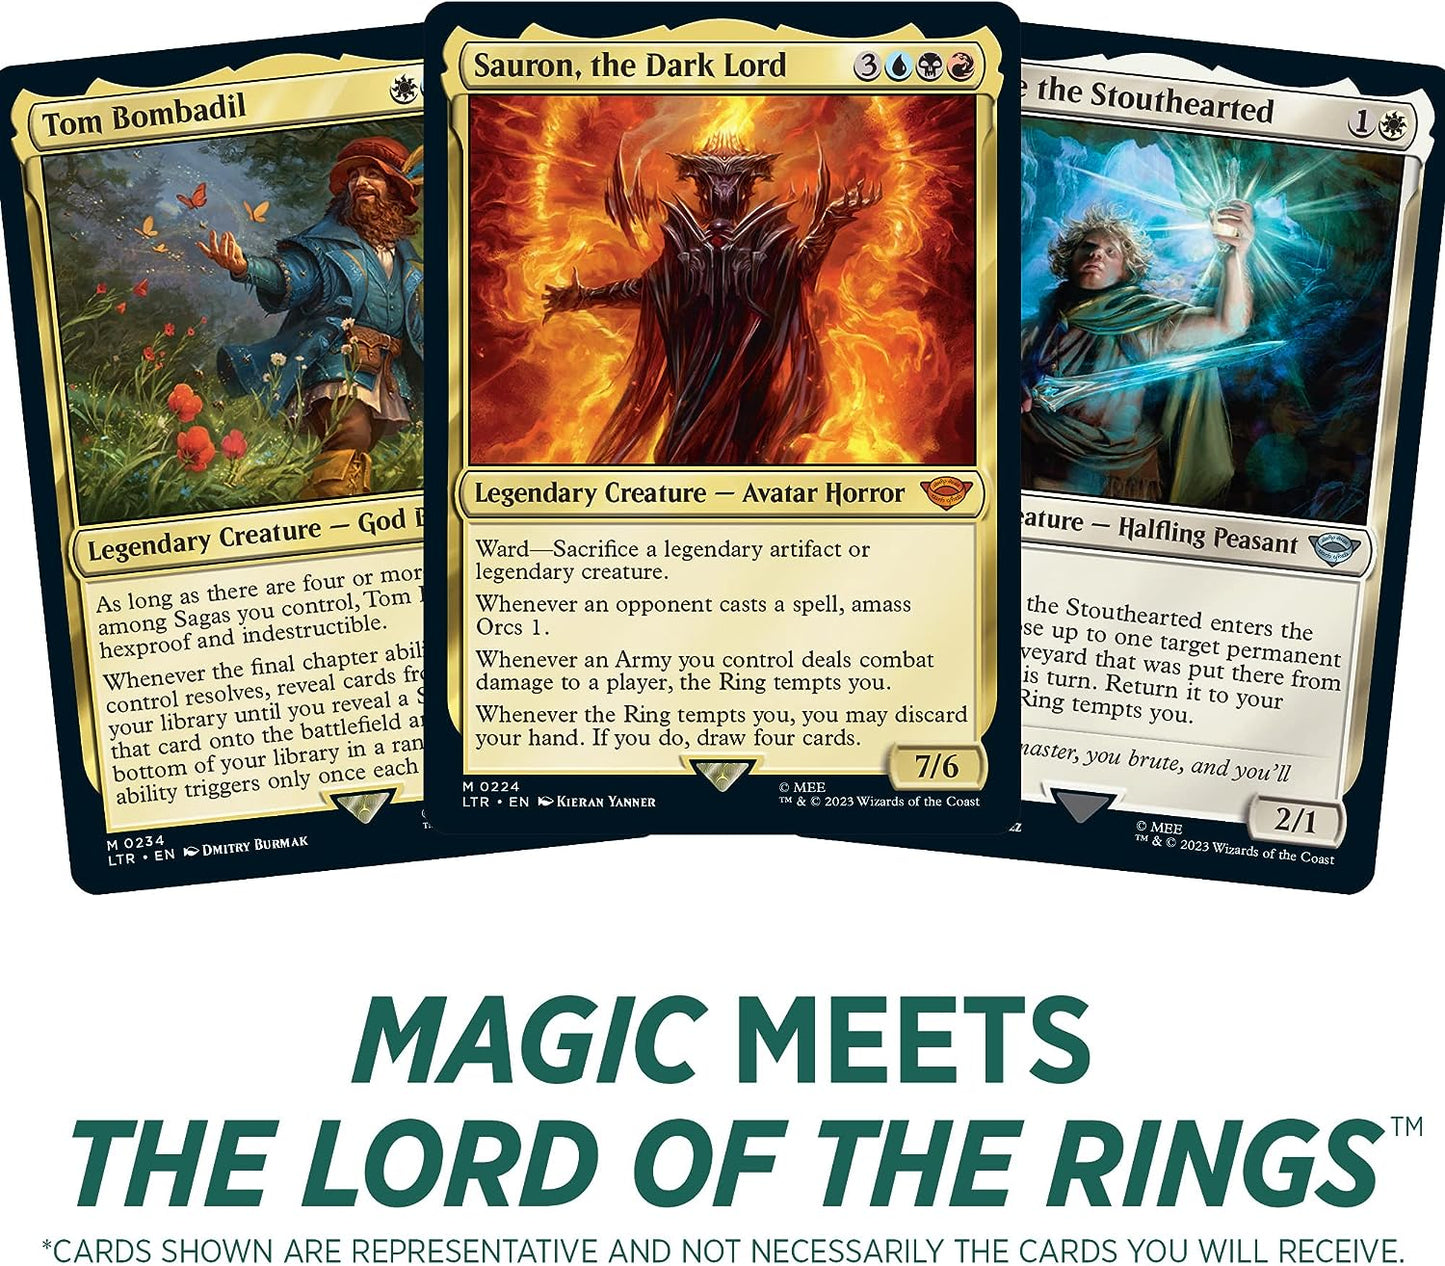 The Lord of The Rings: Tales of Middle-Earth Set Booster Box - 30 Packs